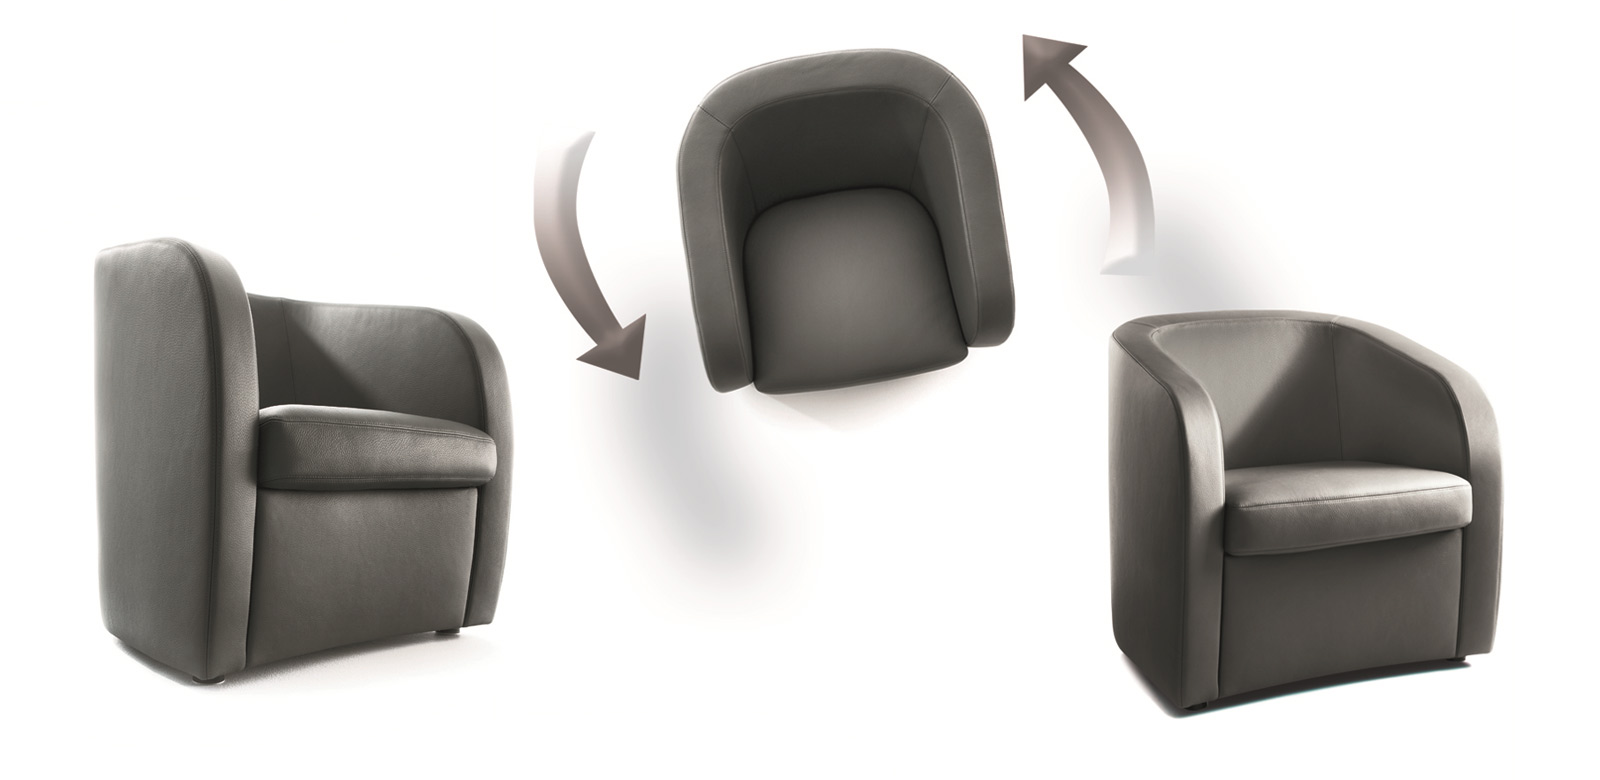 Armchair CL130 shown from different positions with functions